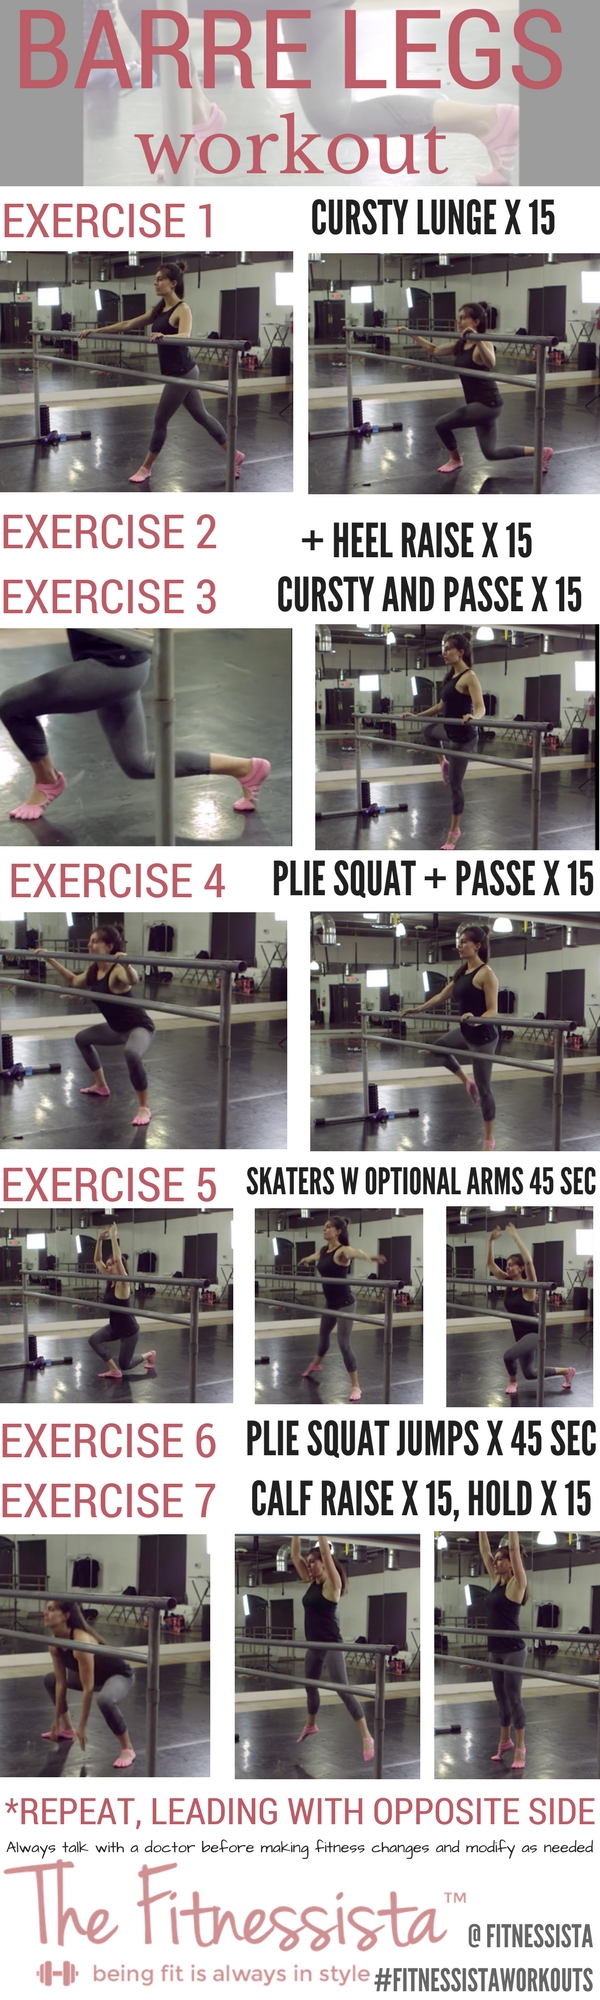 Barre Legs Workout You Can Do At Home for Lean, Strong Legs!